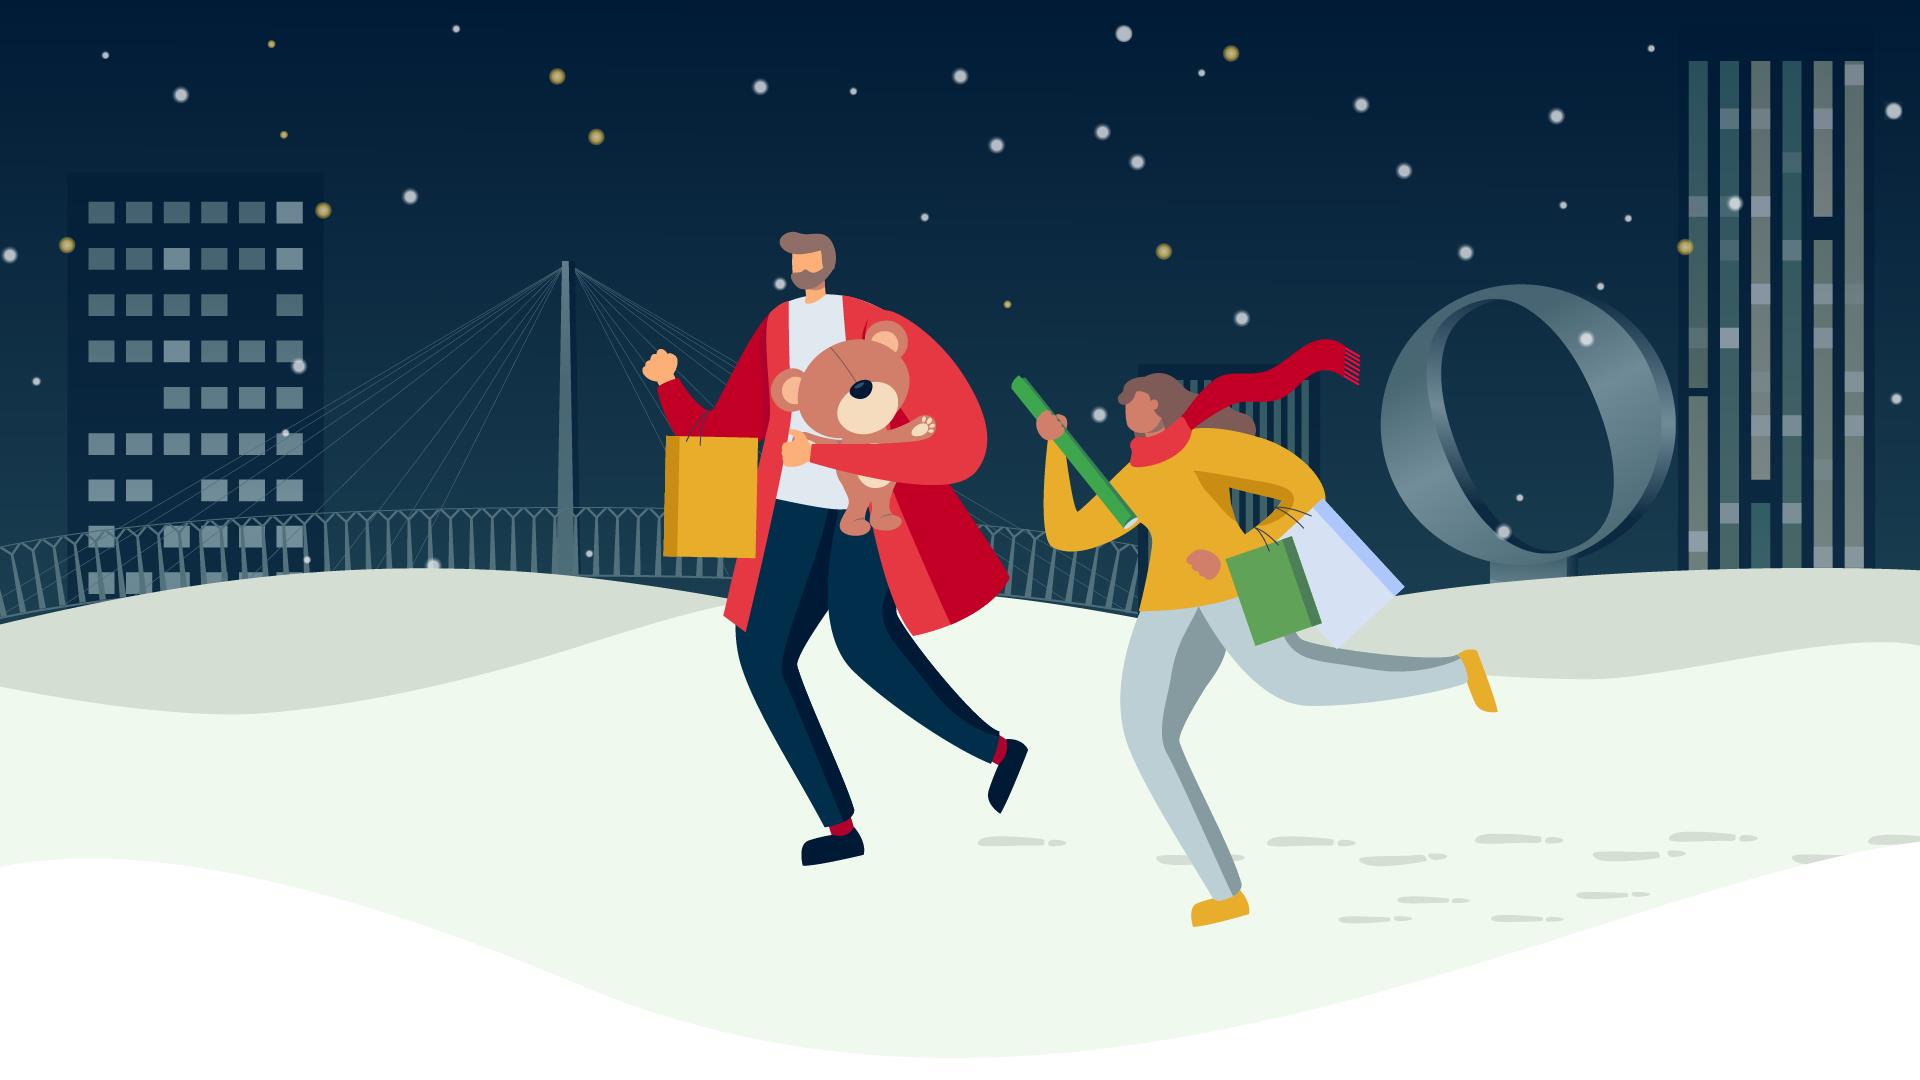 Illustrated Christmas scene with two people running with shopping bags